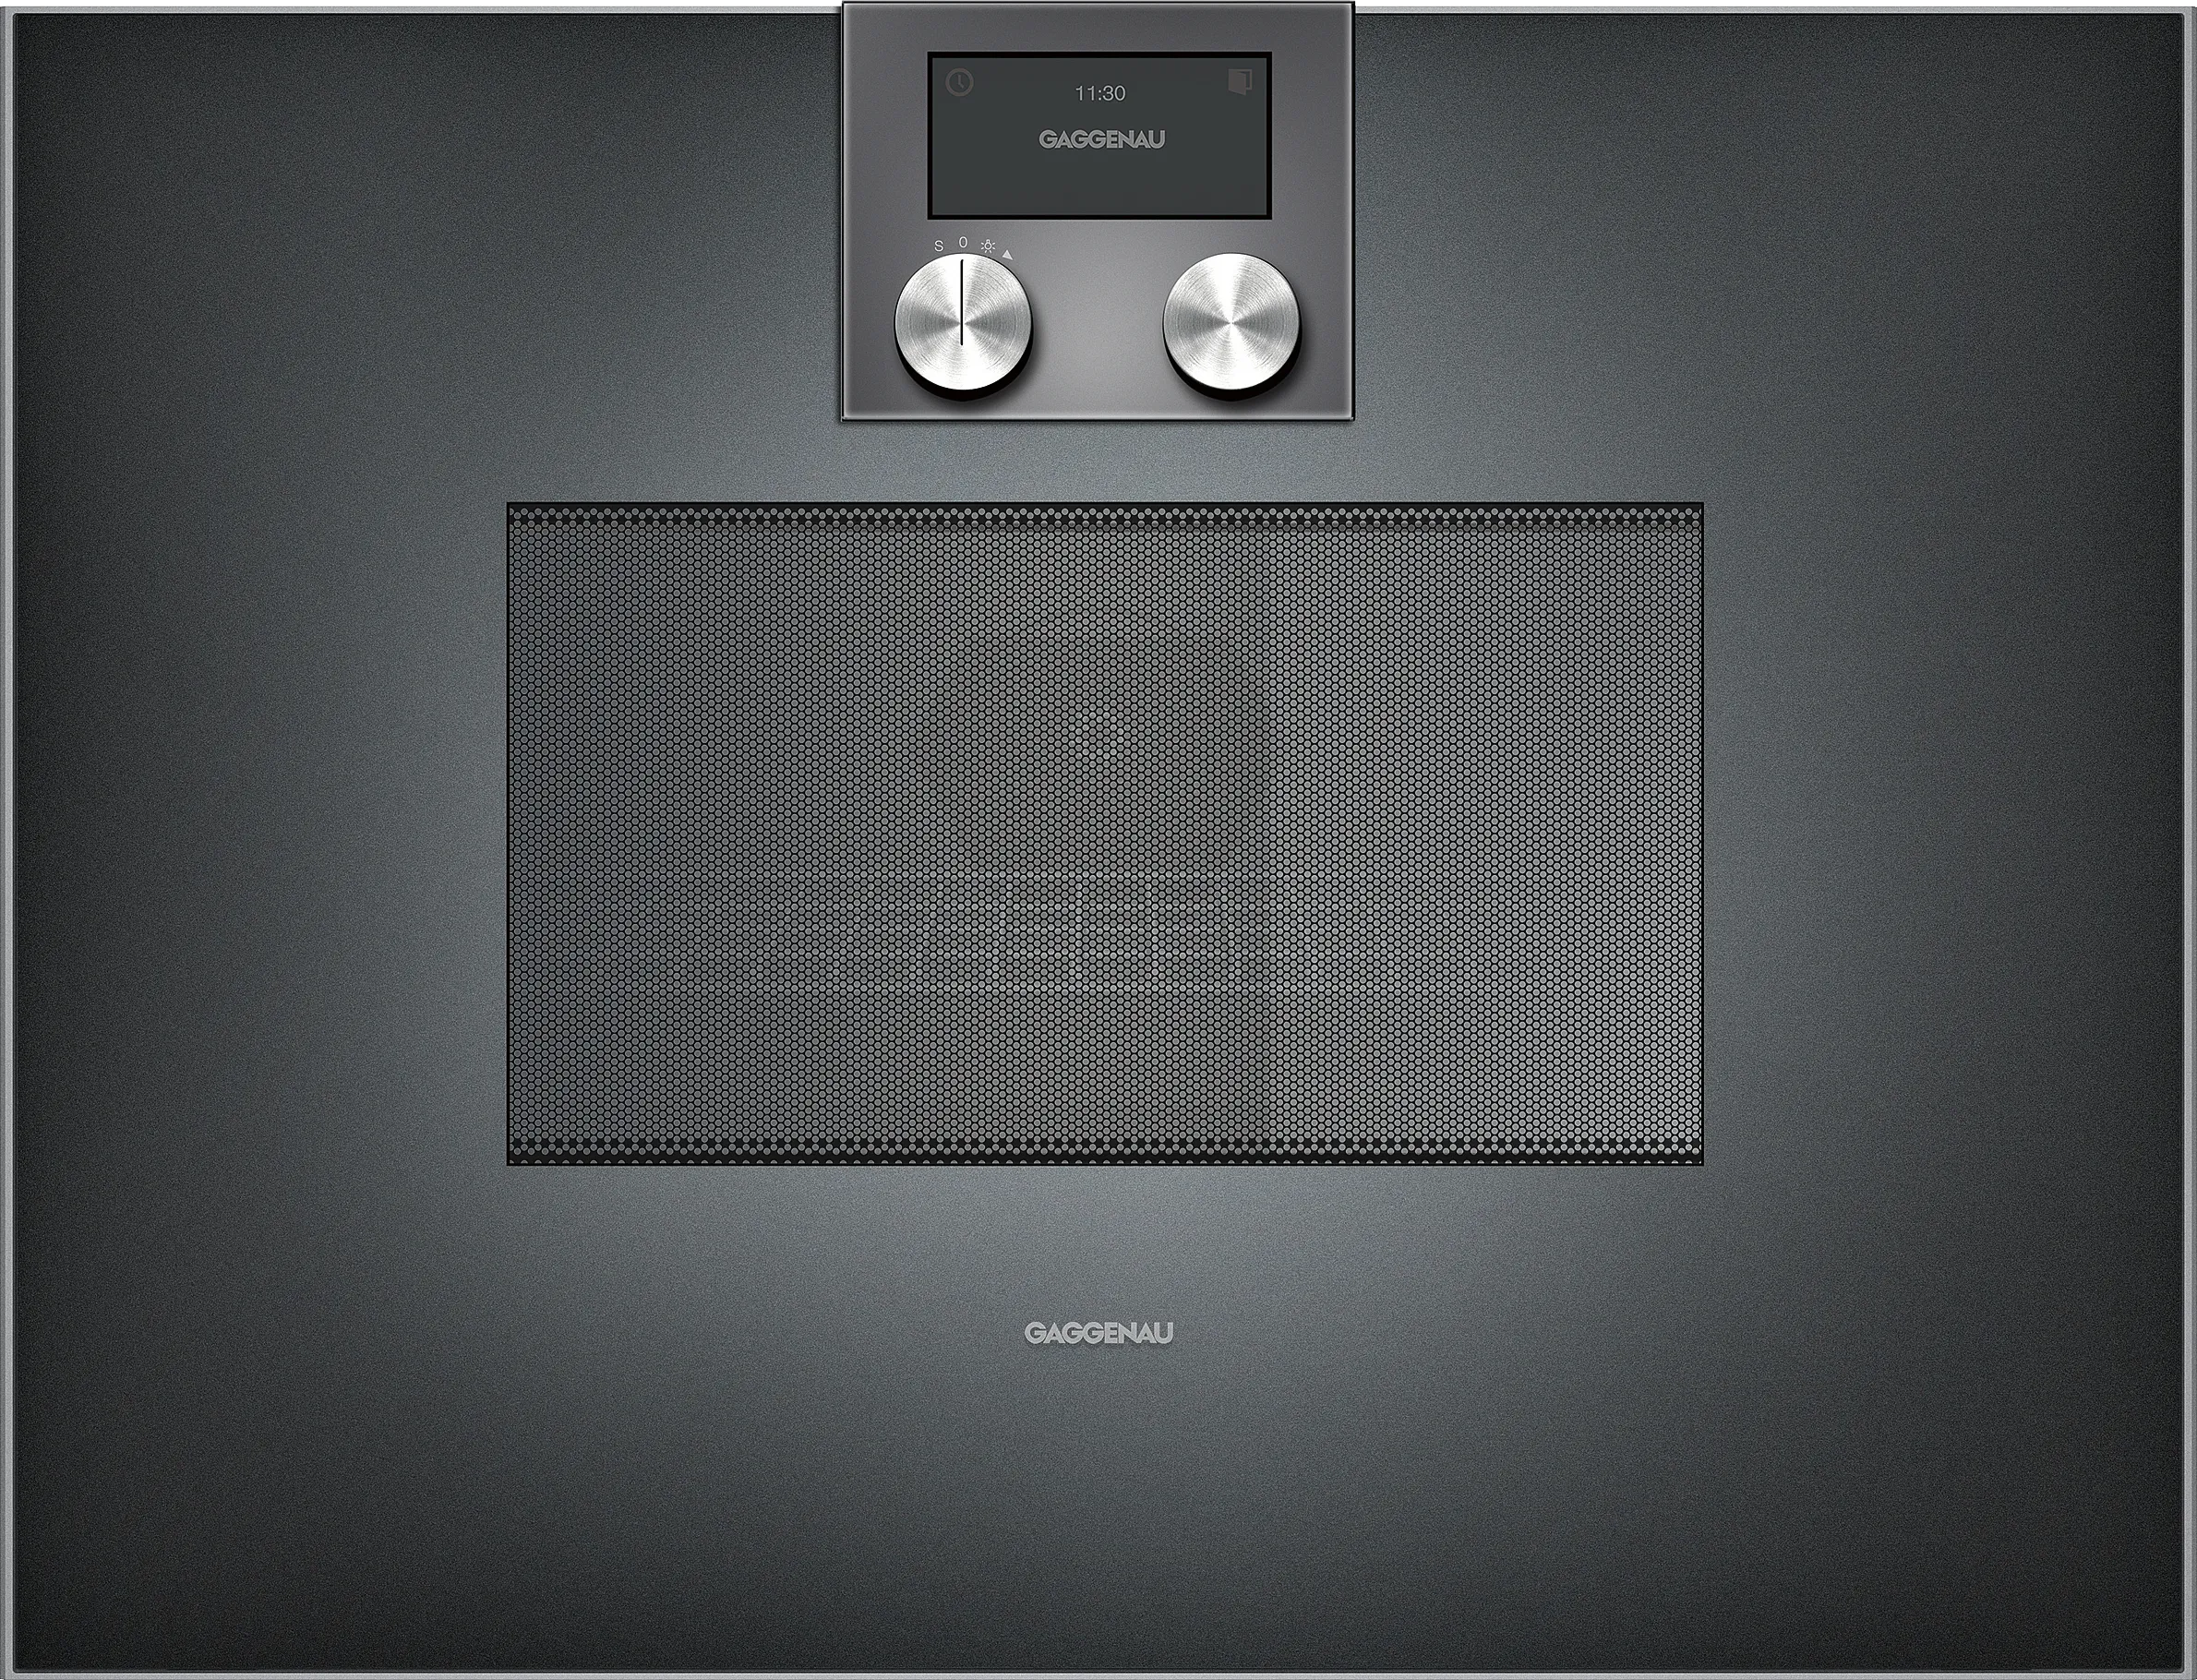 400 series built-in compact oven with microwave function 60 x 45 cm Door hinge: Right, Gaggenau Anthracite 